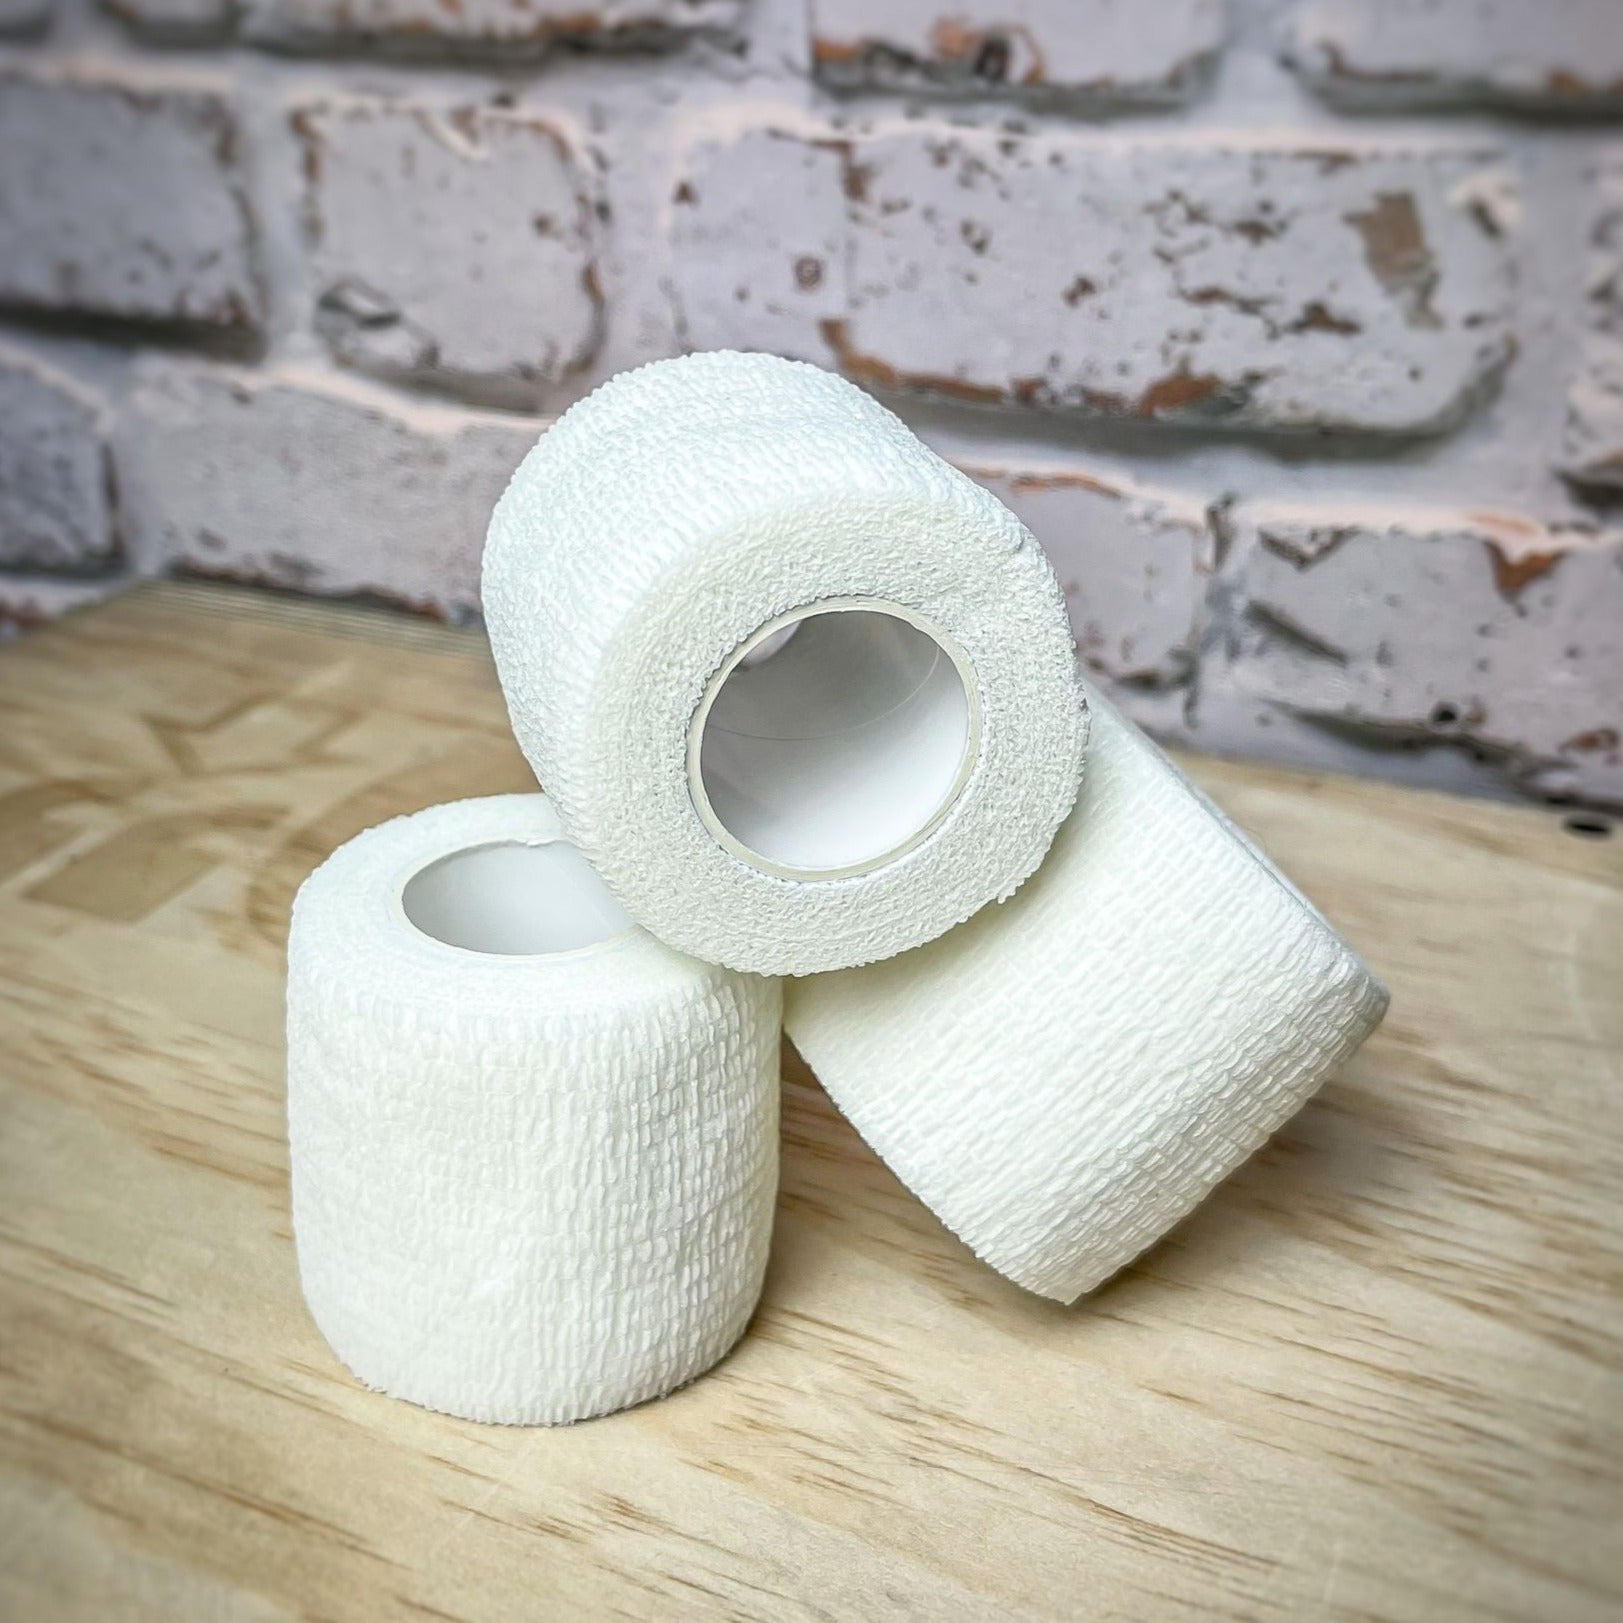 Weightlifting Thumb Tape – NoRepGear